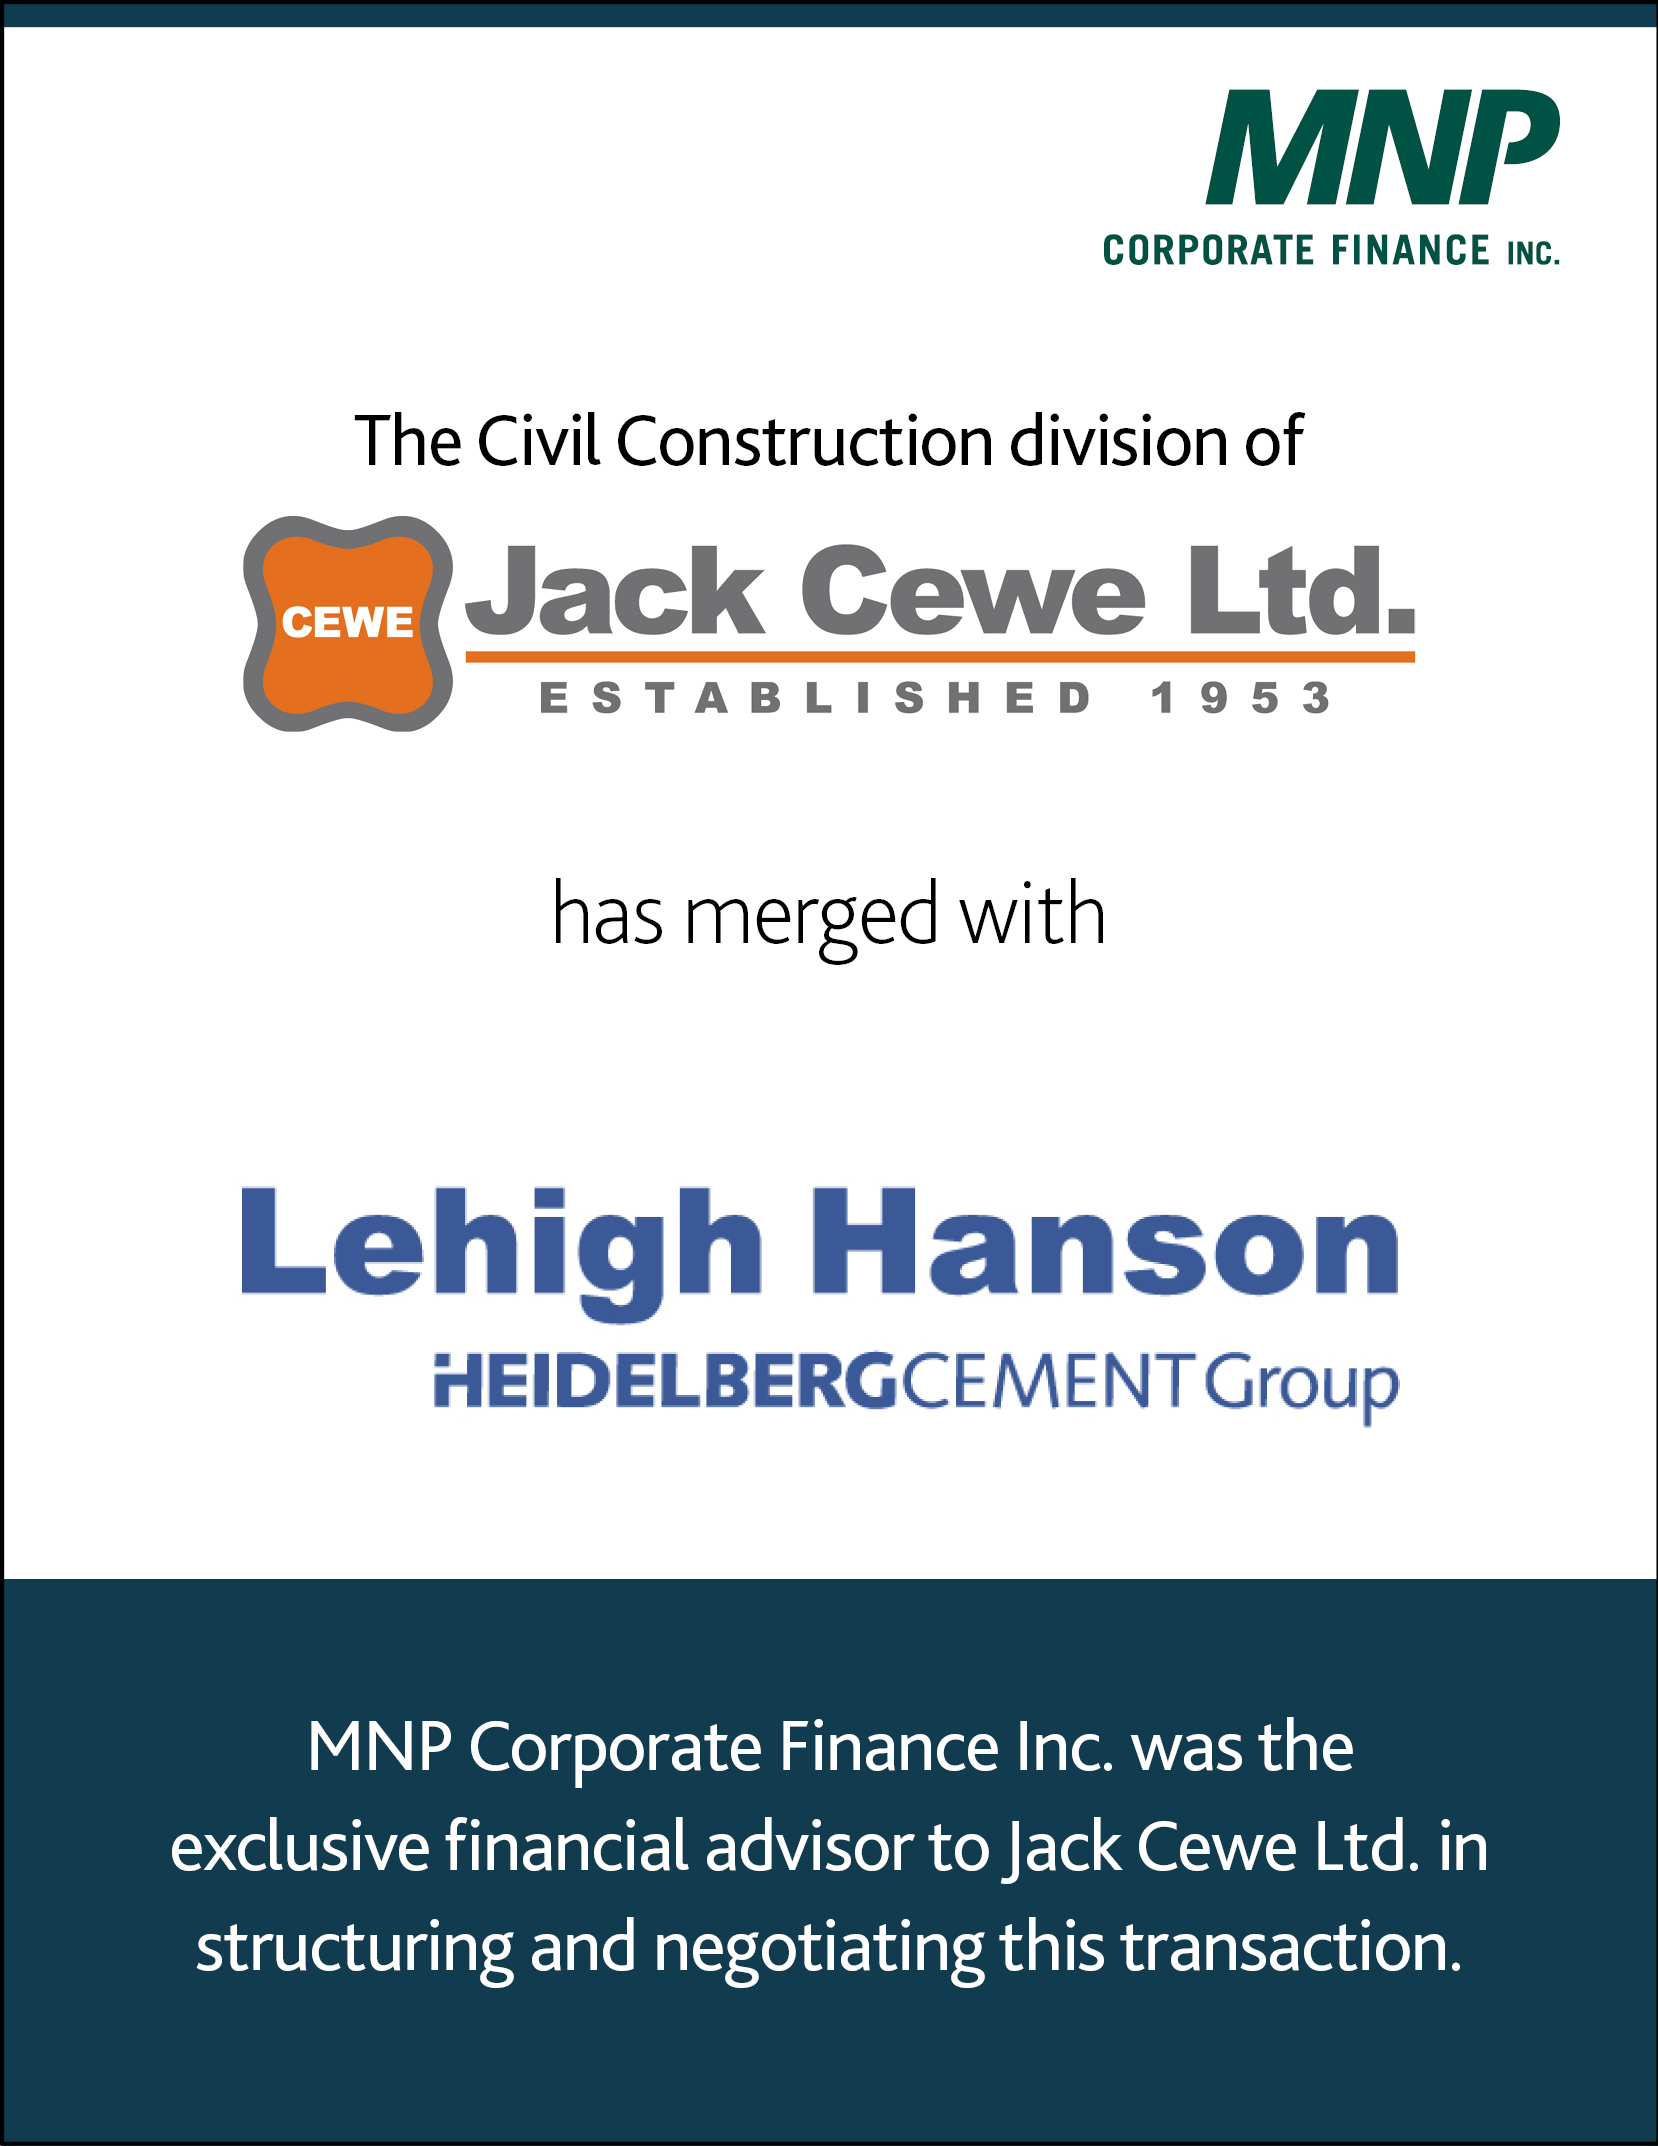 The Civil Construction division of Jack Cewe Ltd. has merged with Lehigh Hanson.